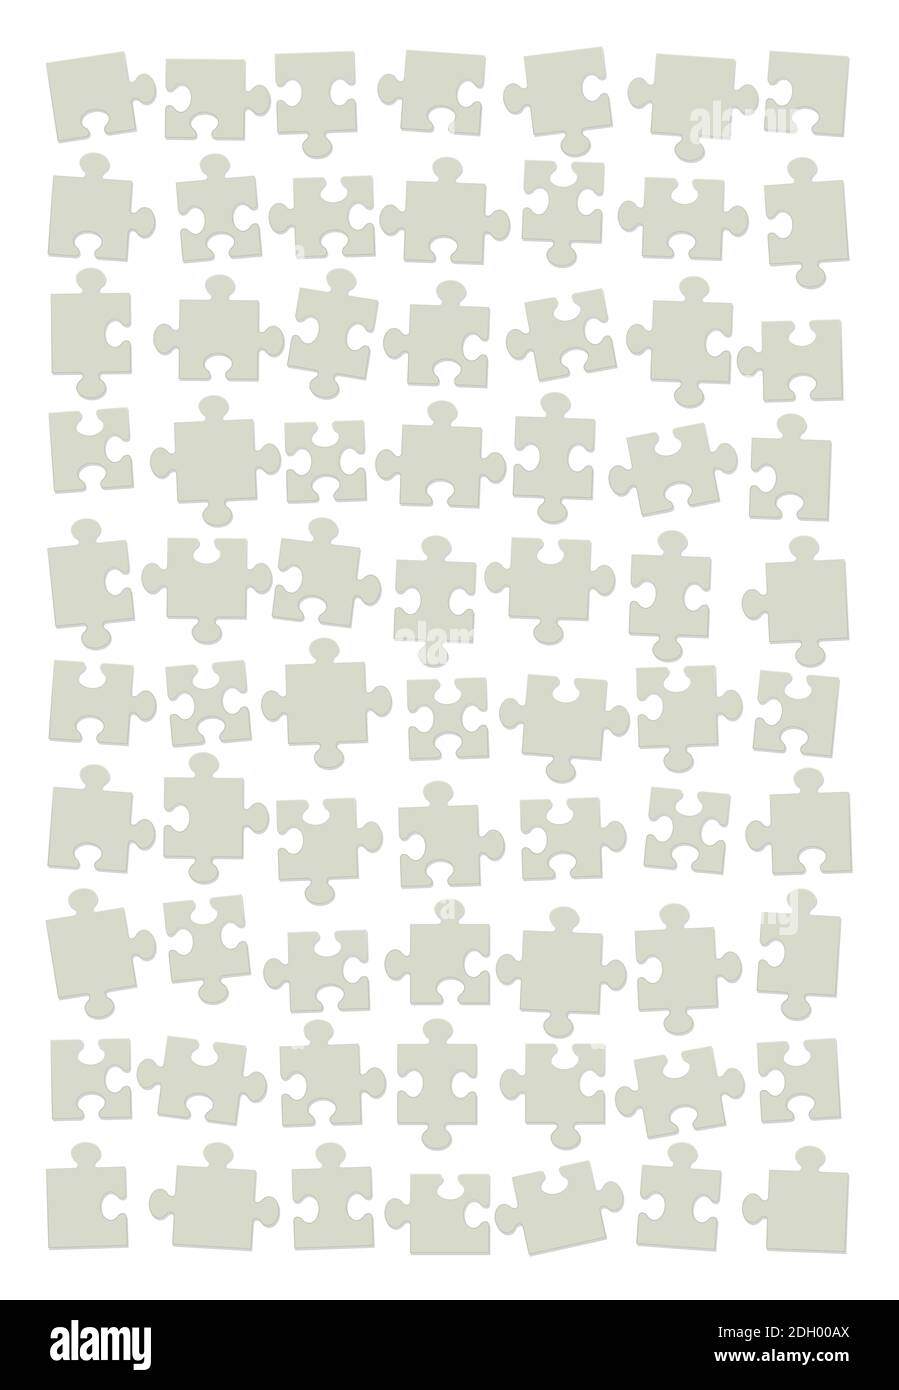 Jigsaw puzzle back side. Scattered, shuffled, and assorted green cardboard pieces, but not put together yet - illustration on white background. Stock Photo